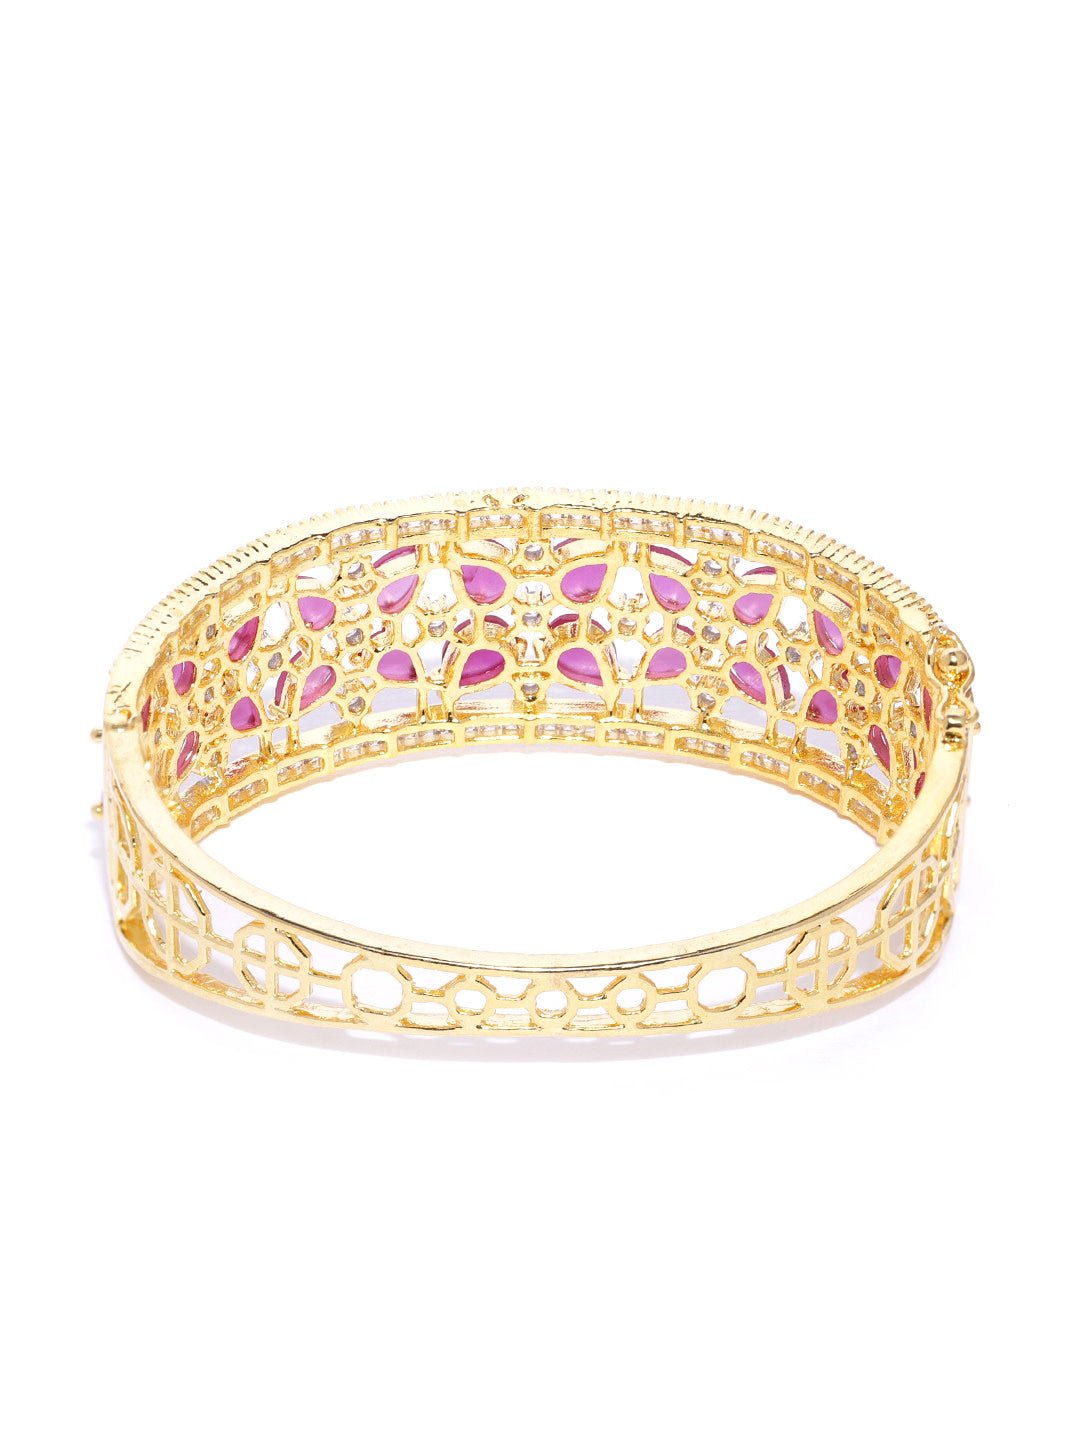 Gold-Plated American Diamond and Ruby Studded, Floral Patterned Kada Bracelet in Pink Color